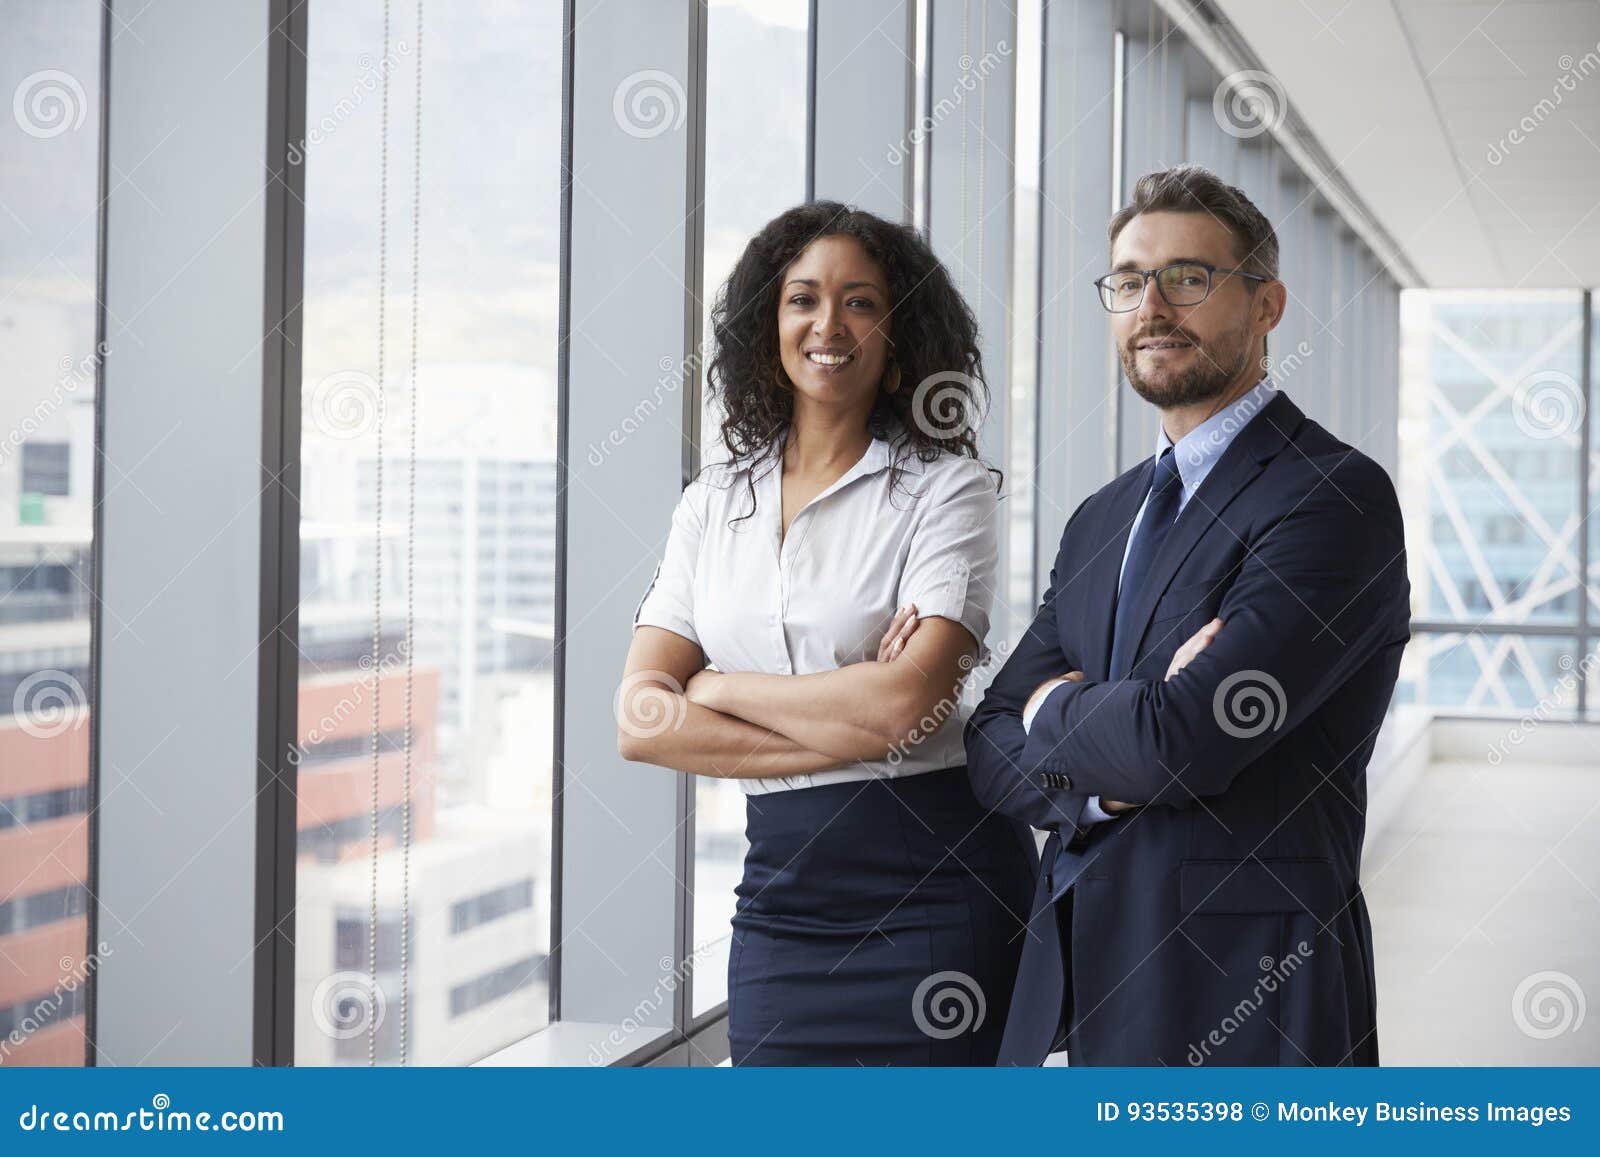 portrait of new business owners in empty office